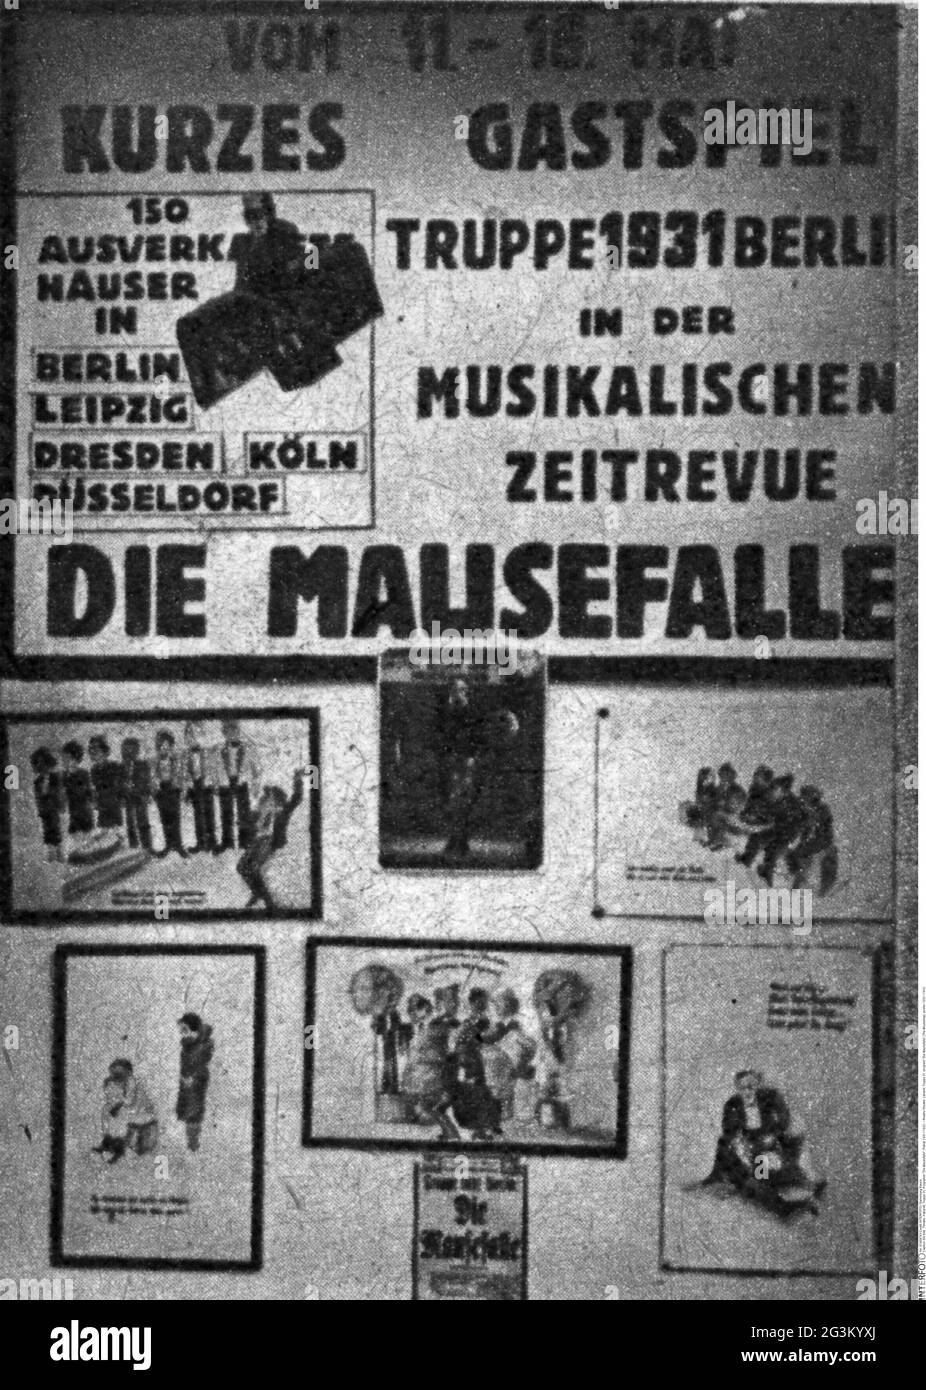 theatre / theater, cabaret, Truppe 31, program 'Die Mausefalle' (The Mousetrap), poster, 1931 / 1932, ADDITIONAL-RIGHTS-CLEARANCE-INFO-NOT-AVAILABLE Stock Photo